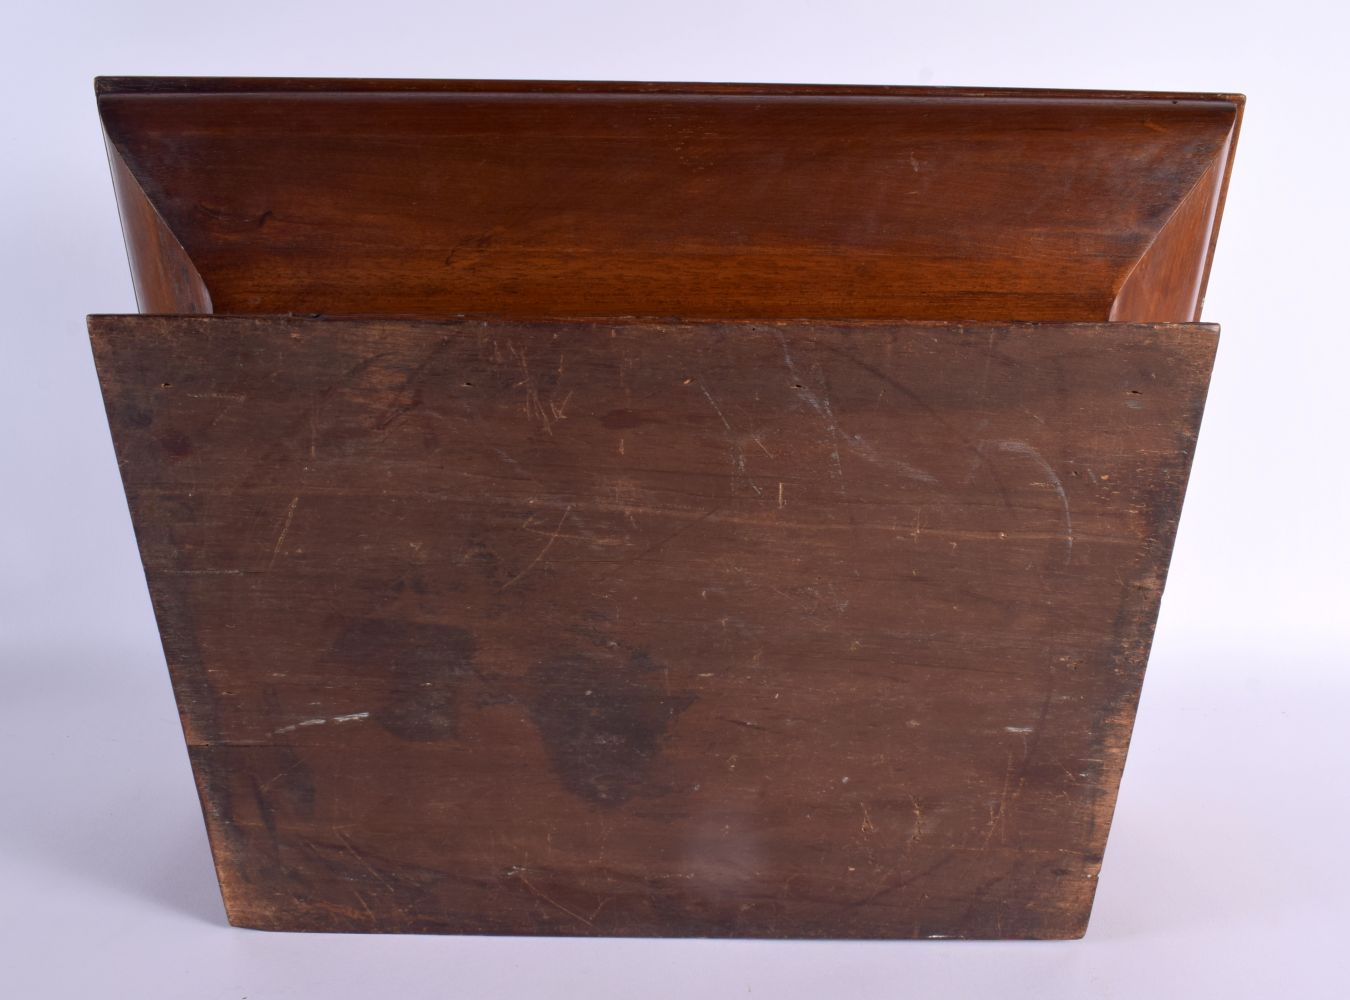 A LARGE LATE VICTORIAN MAHOGANY WORK BOX. 43 cm x 35 cm. - Image 9 of 9